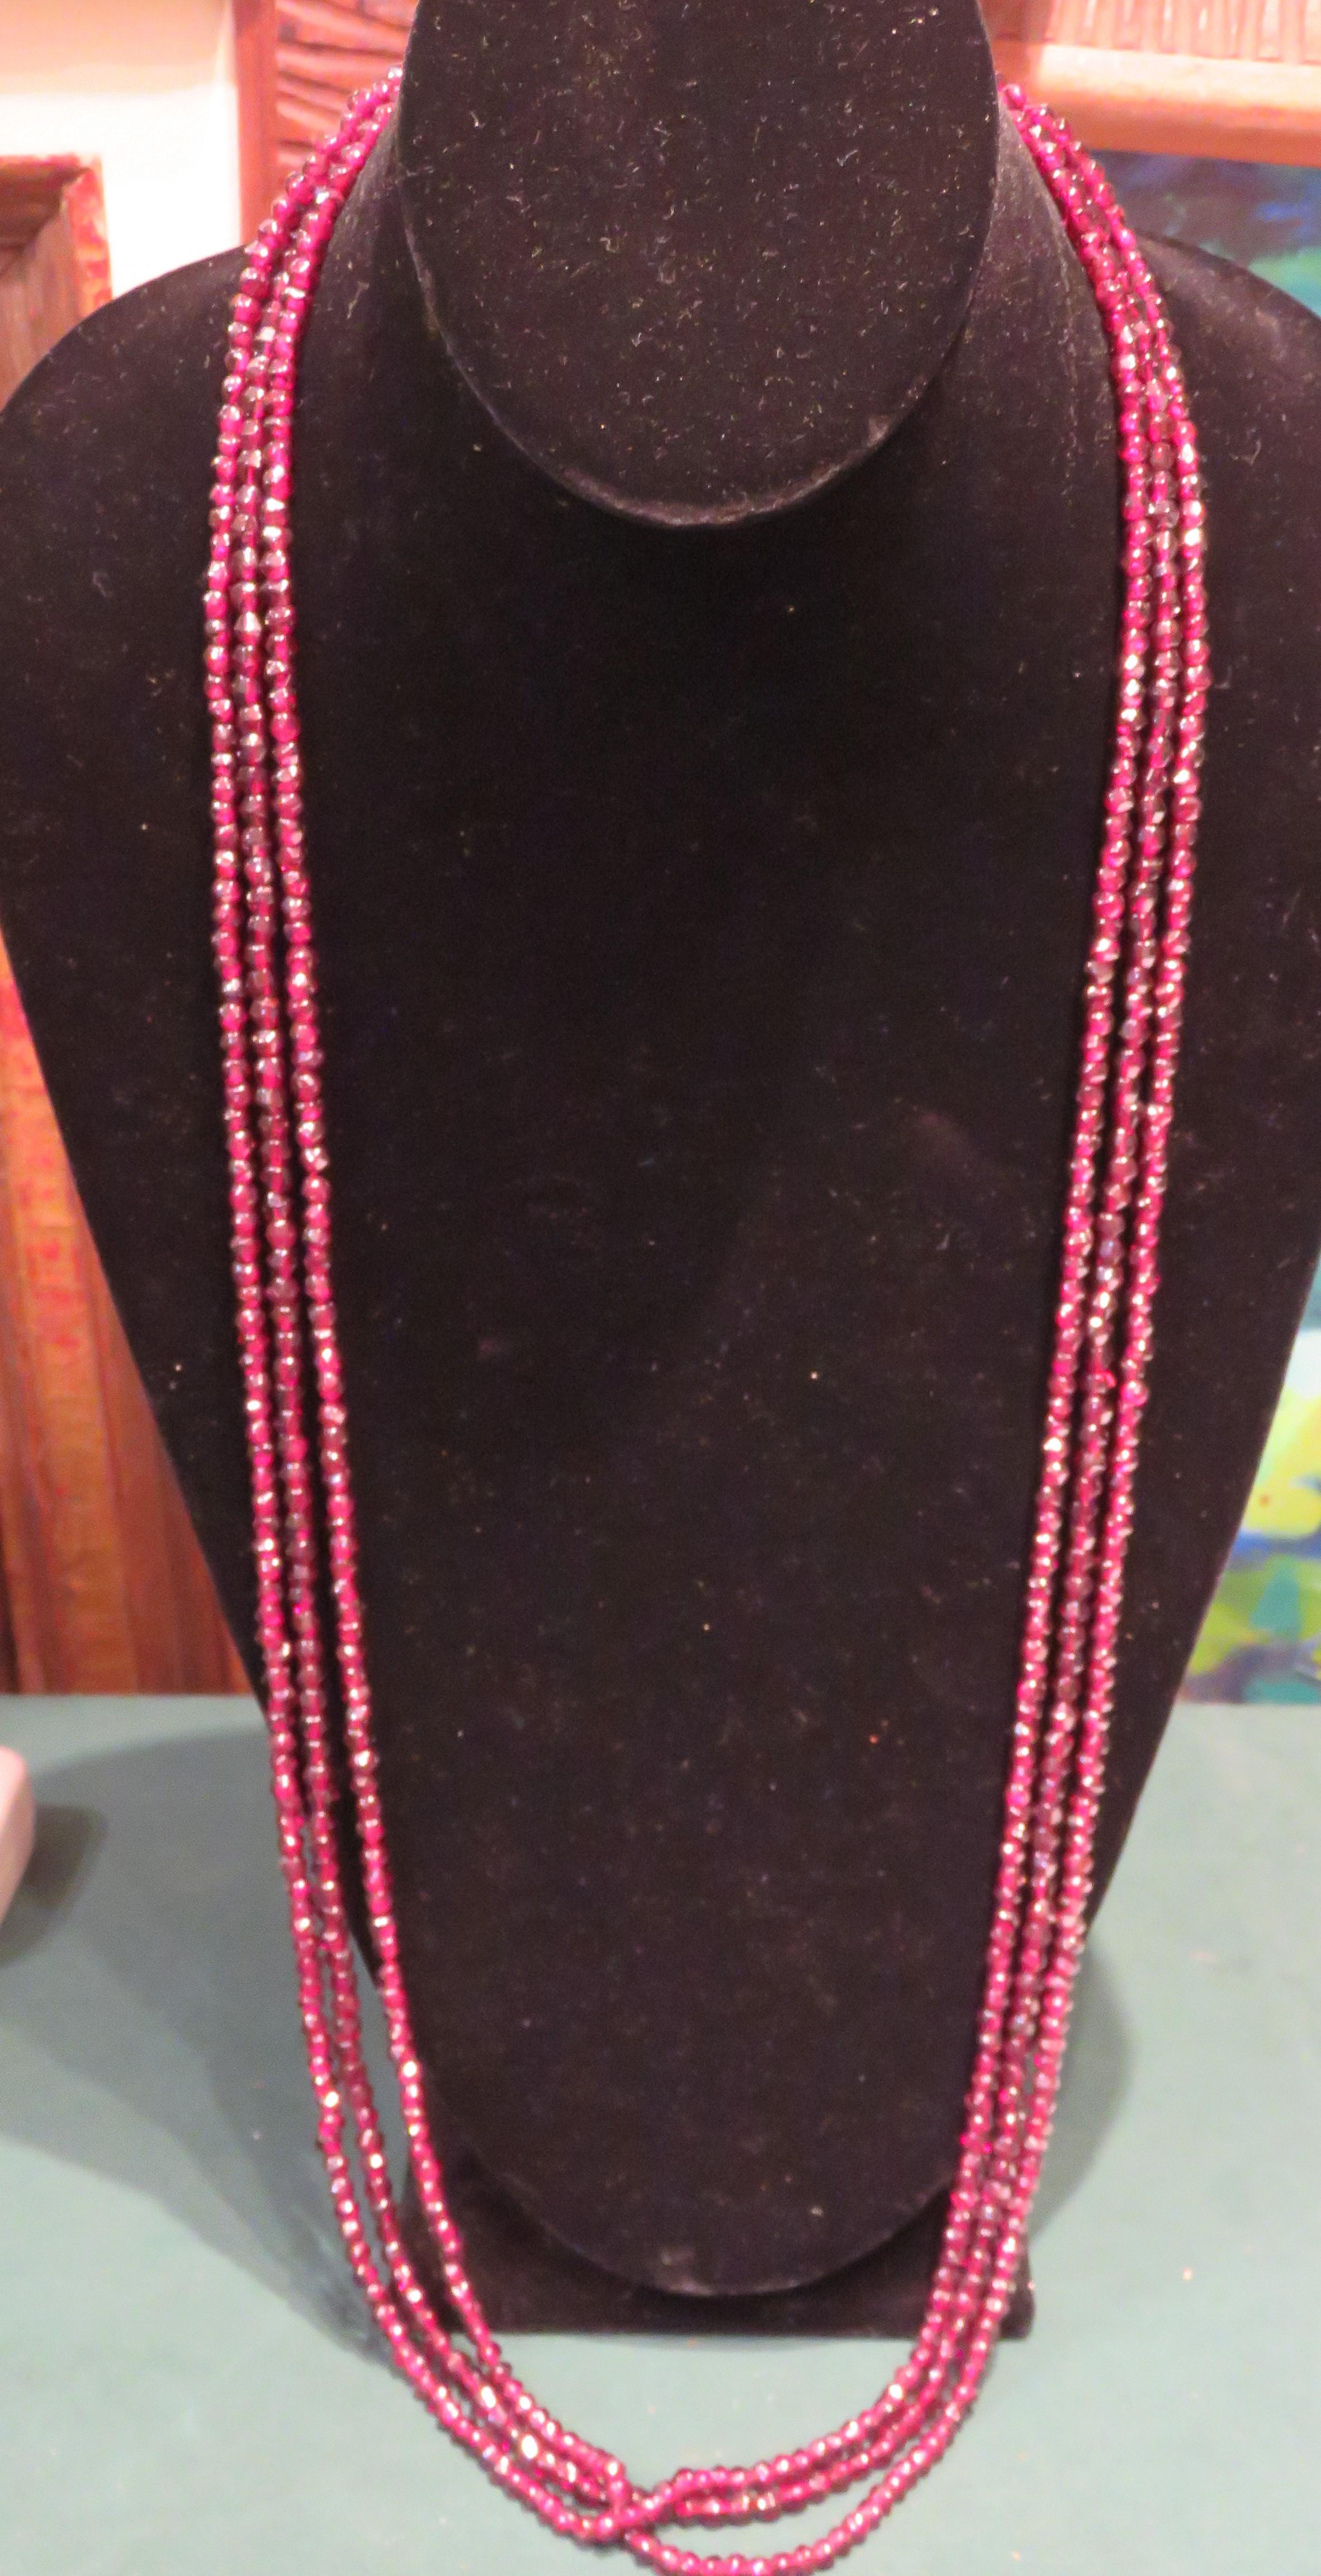 The Following Item we are offering are these Three Rare Important Radiant Faceted Red Garnet Long Strand Necklaces. These Necklaces have 3 Magnificent Rare Round Cut Glittering Garnets and each strand measures approx 35